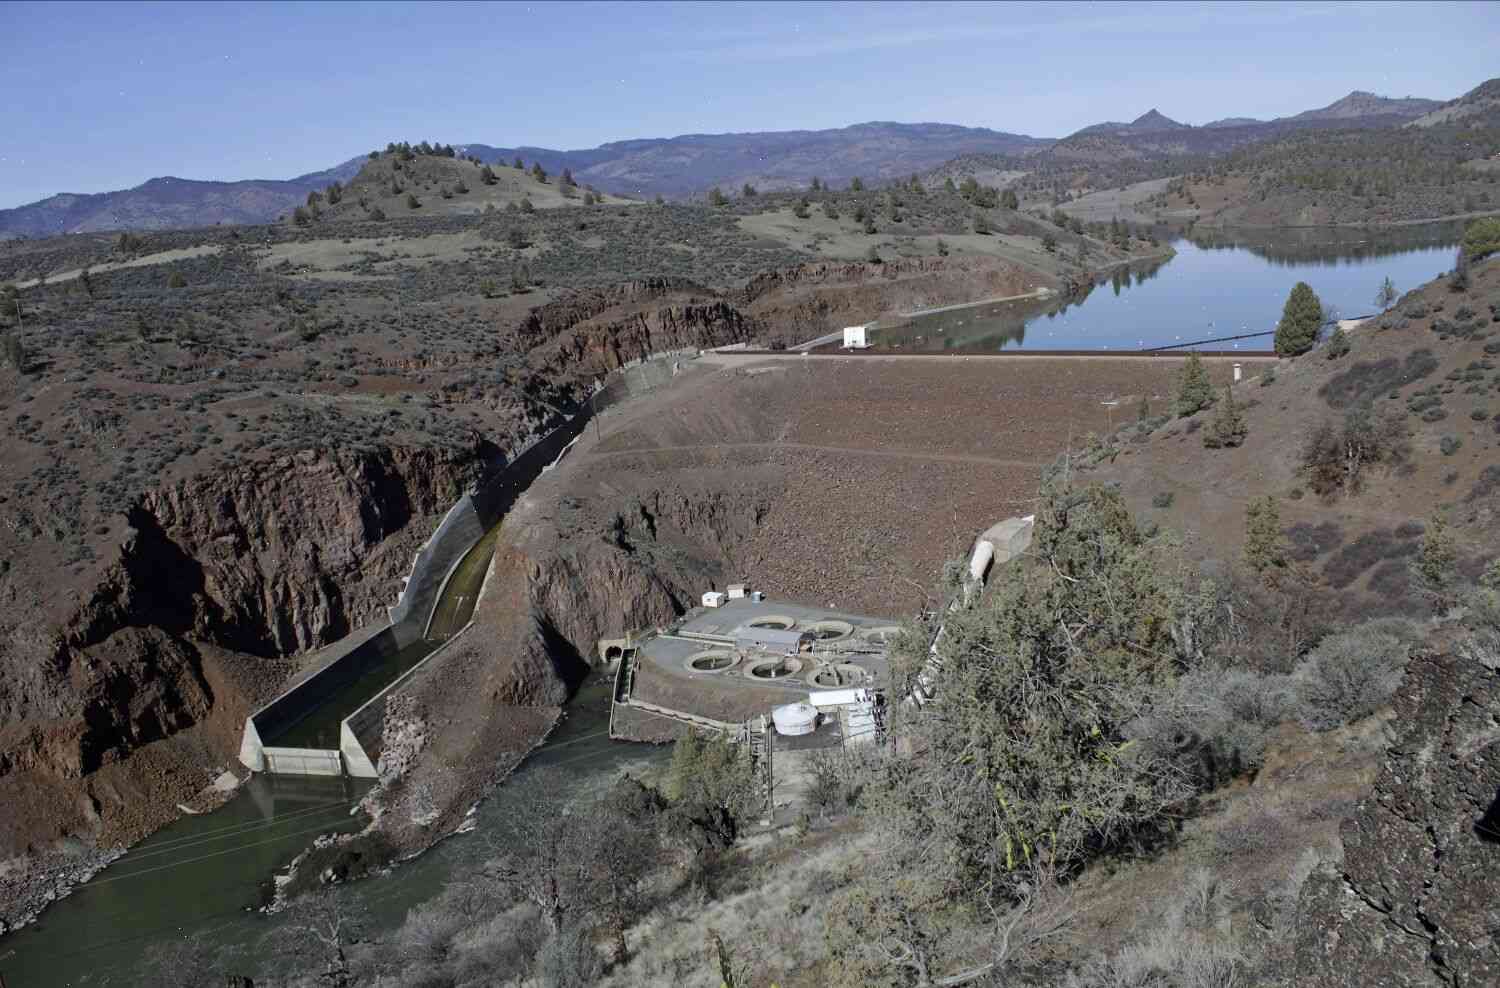 The Klamath Falls Dam Removal Plan is the first of three demolition orders